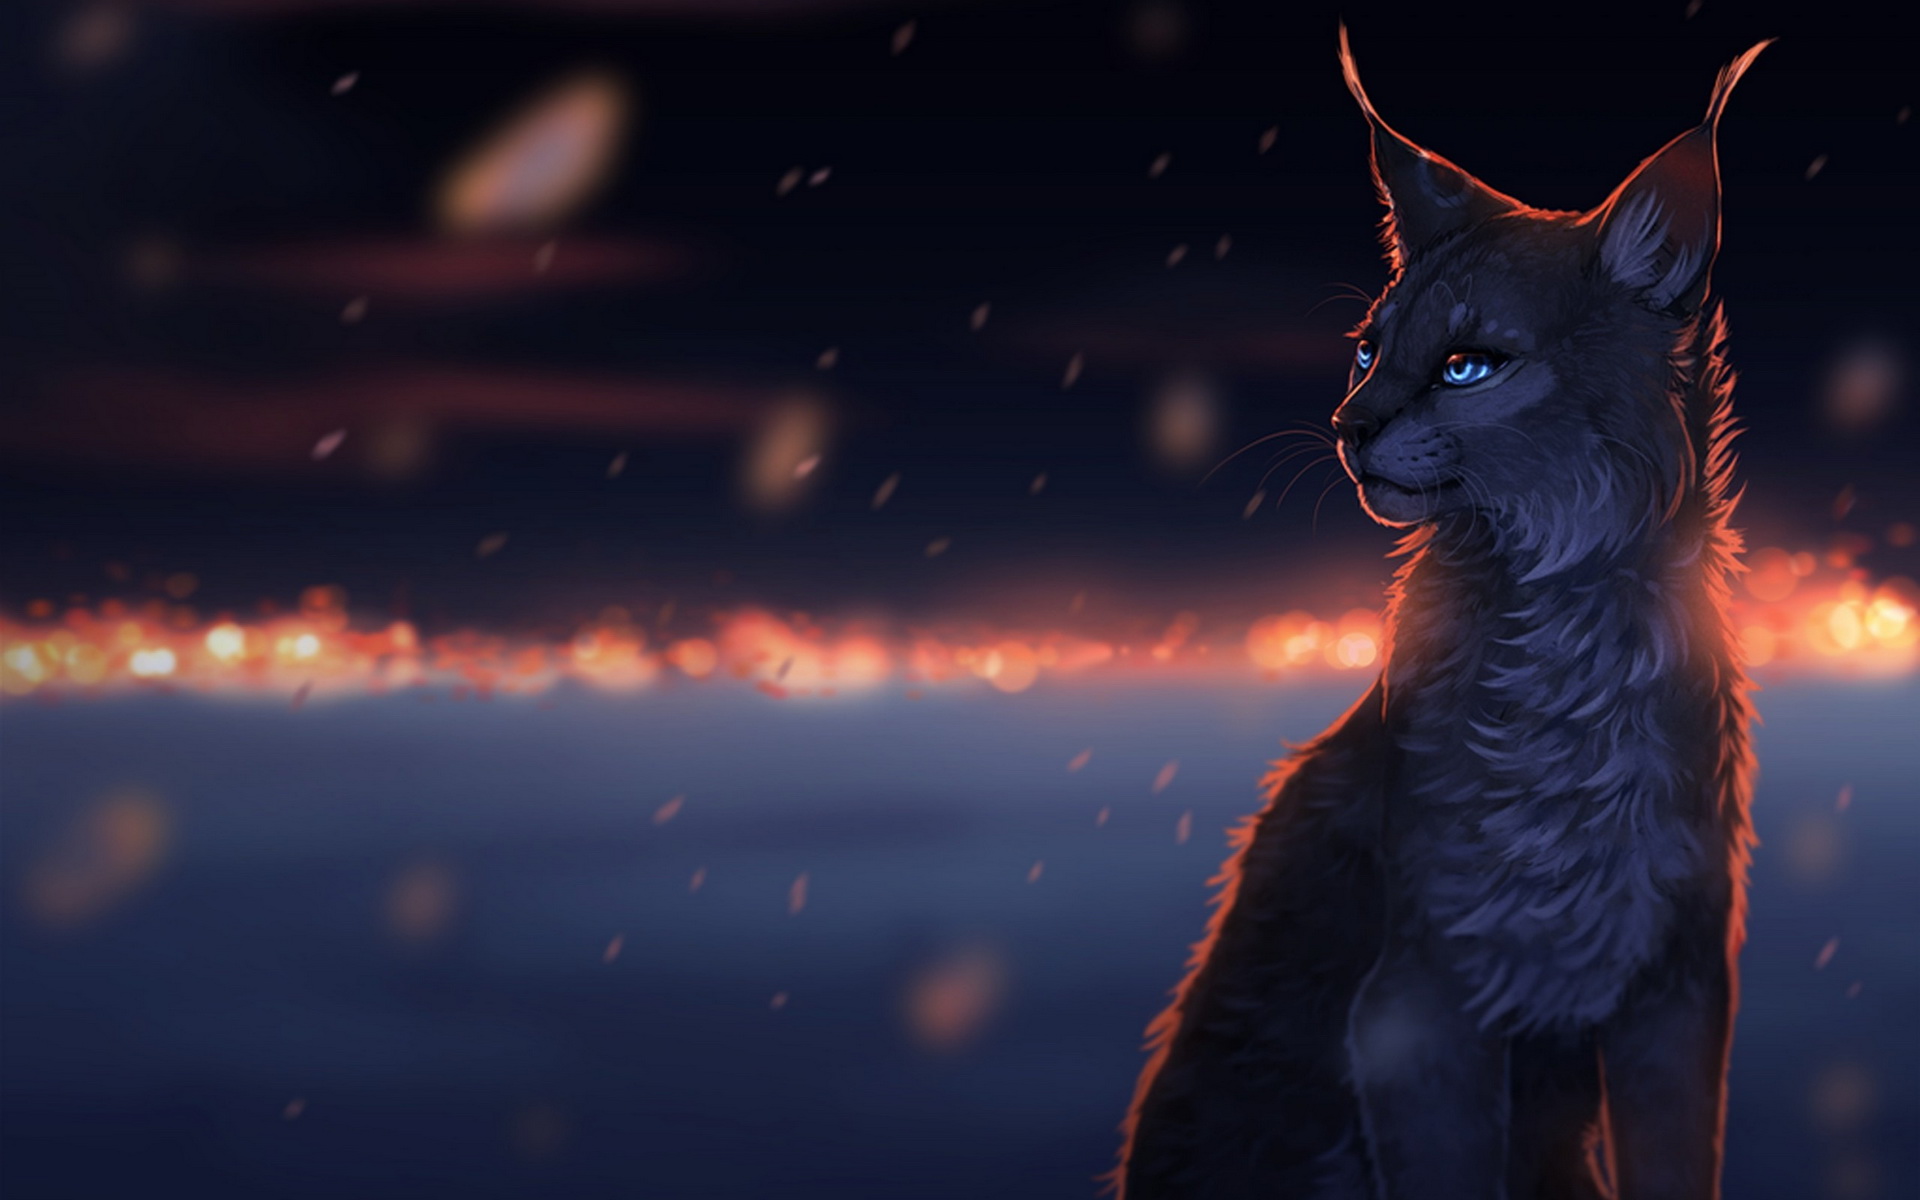 Steam backgrounds with cats фото 100